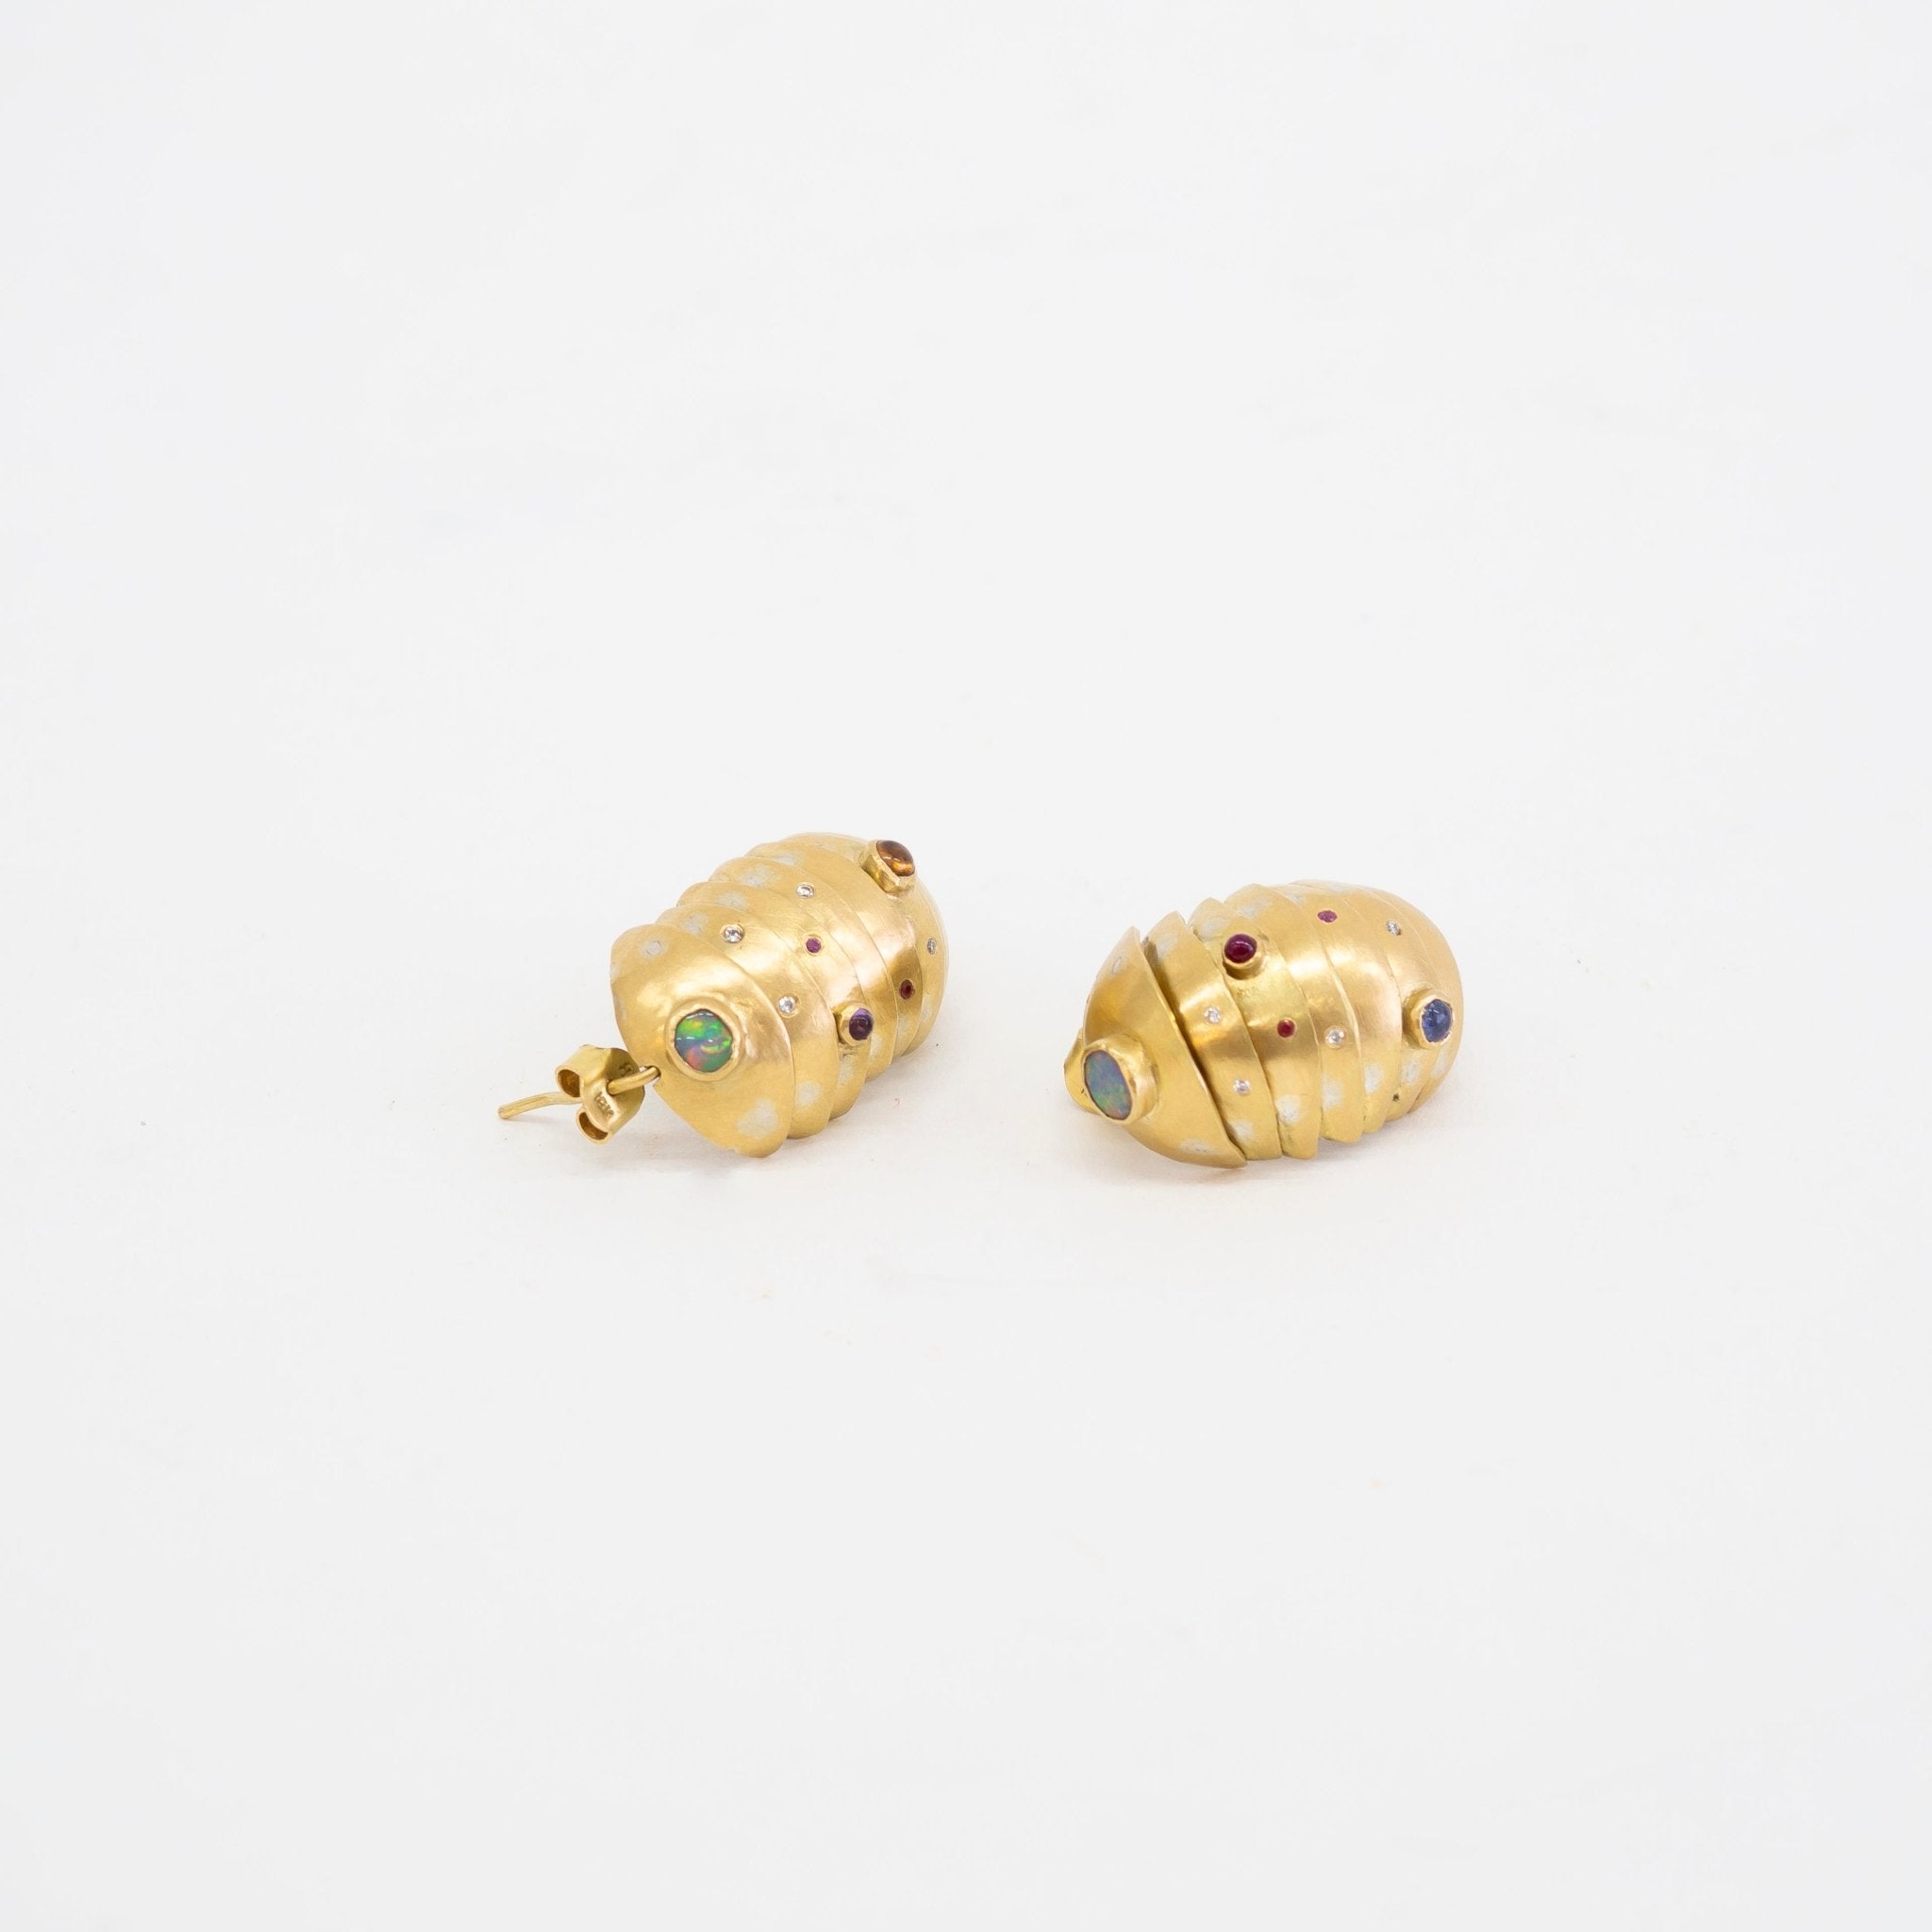 Black Barc 'Roly-Poly' Earrings No. 2 & No 3. (sold as a pair) | Tortoise General Store